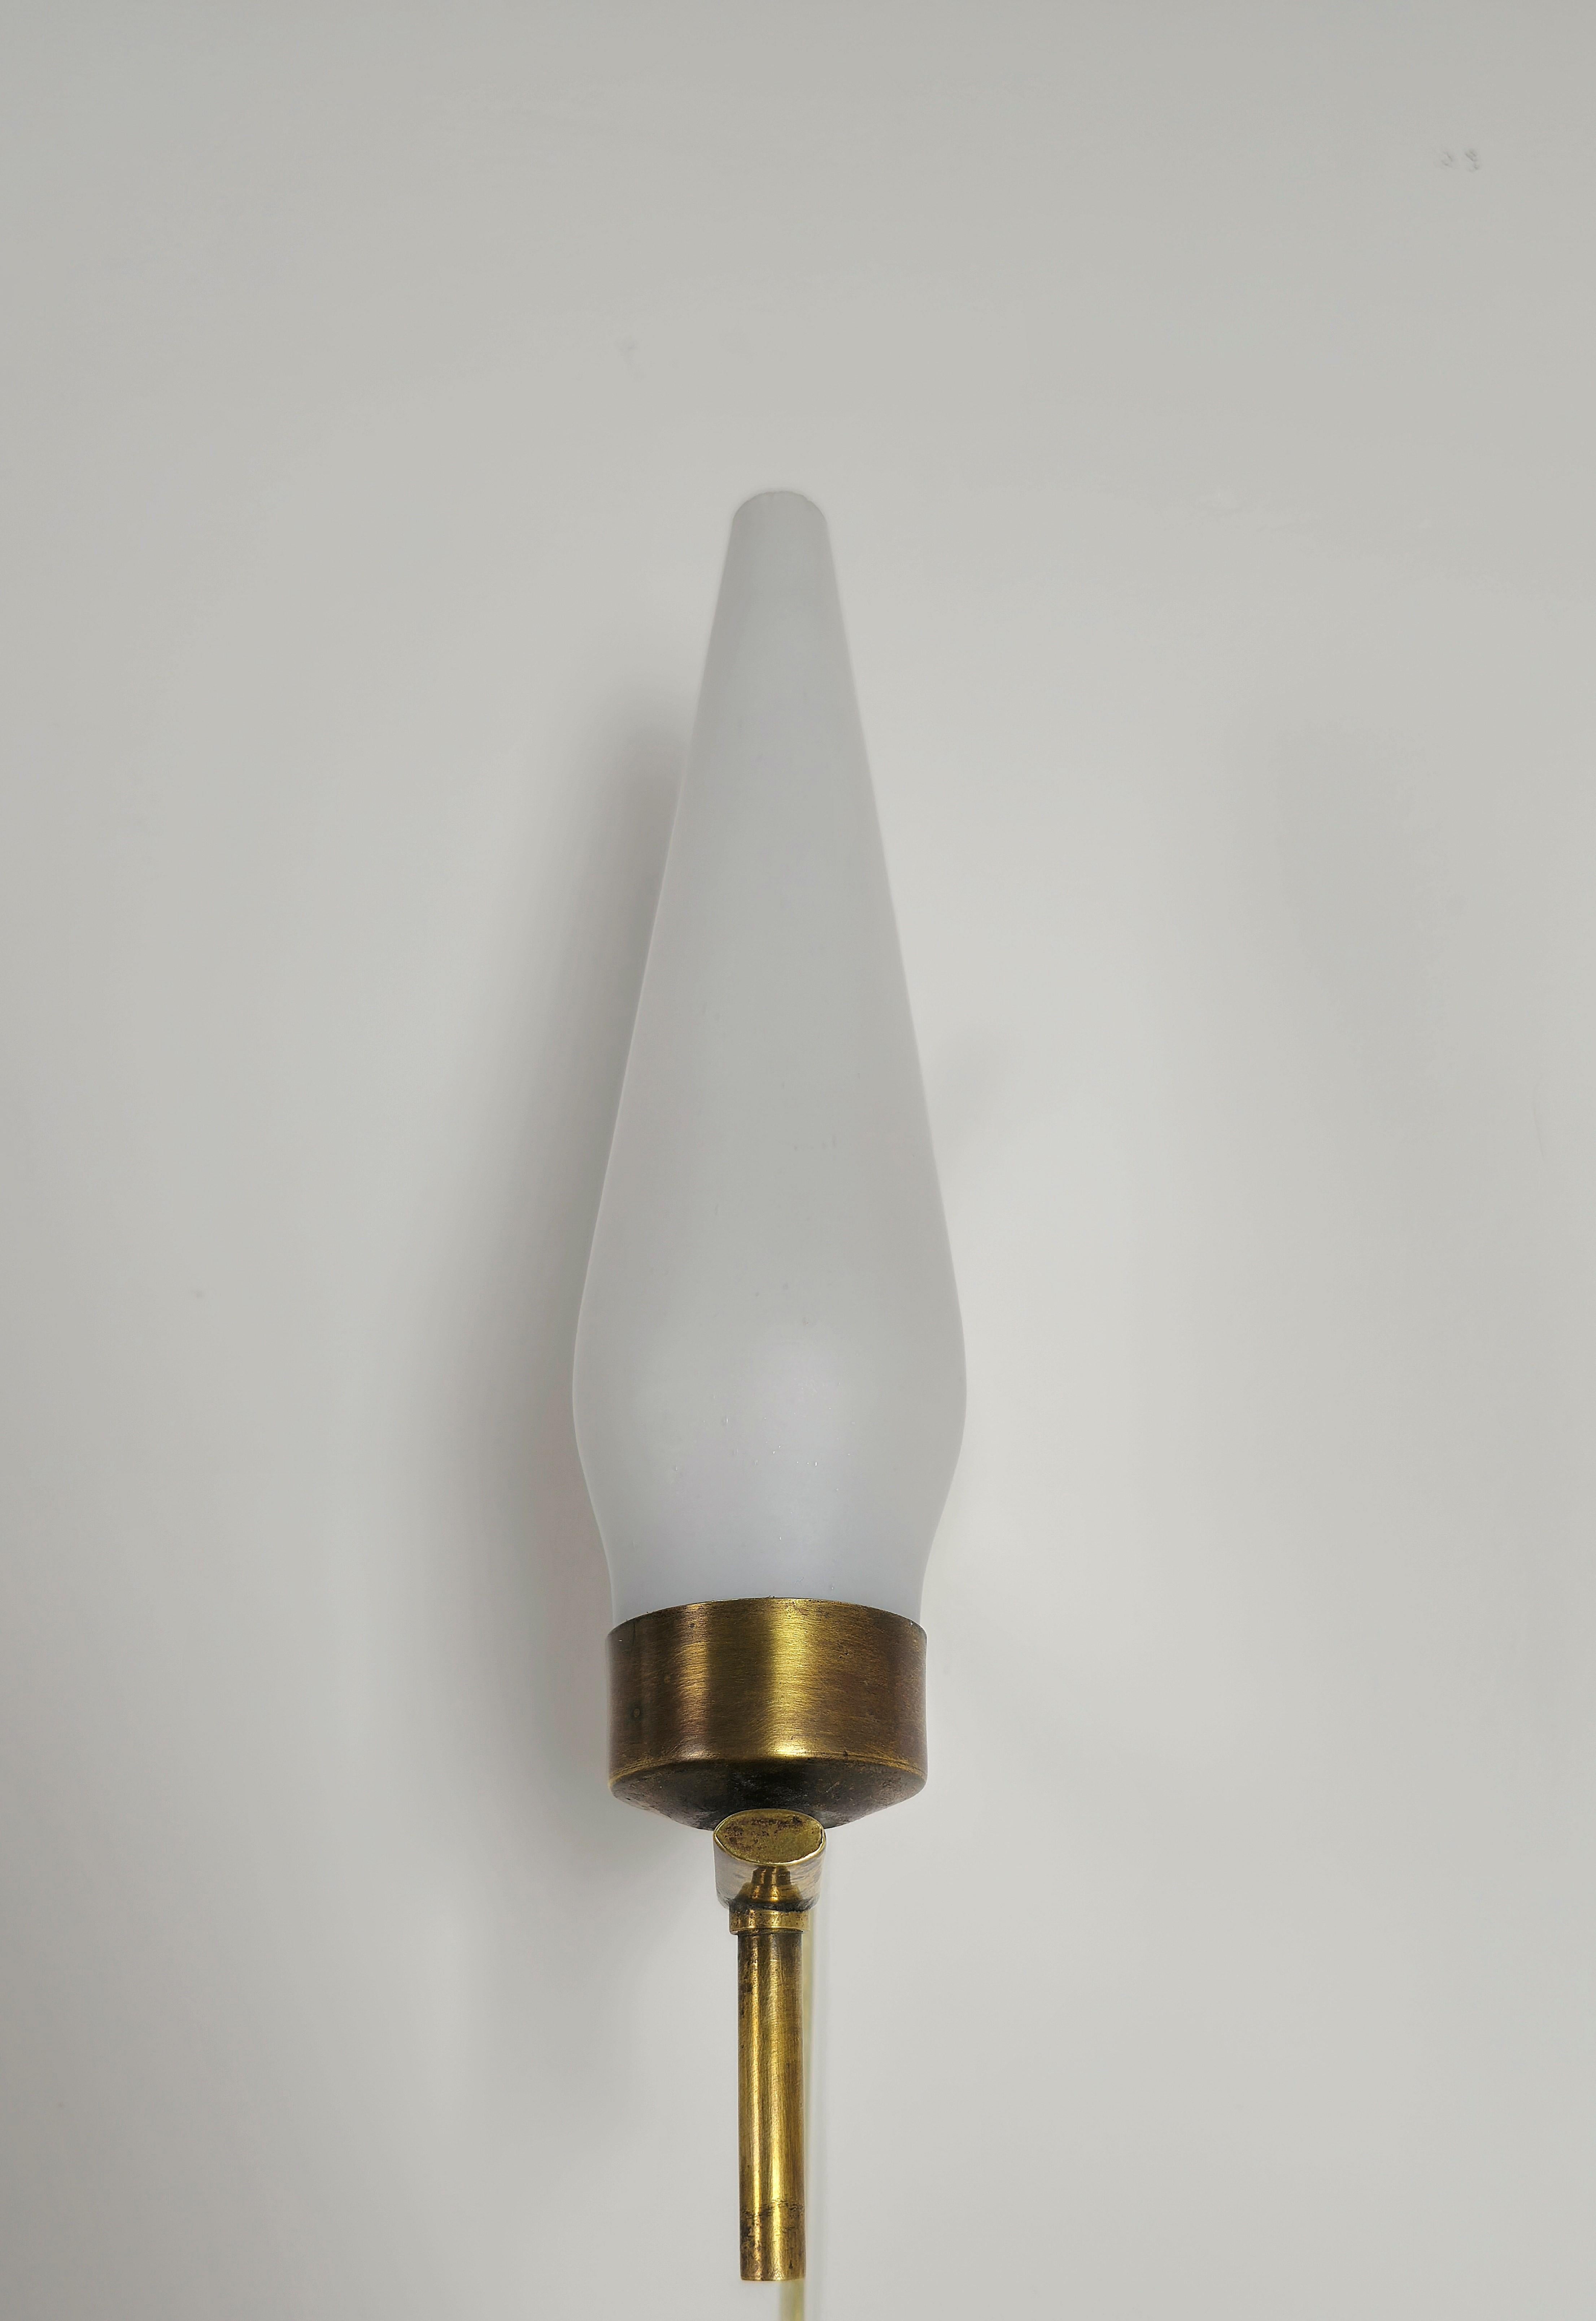 Pair of Wall Lights Sconces Brass Opaline Glass Midcentury Italian Design 1960s  For Sale 7